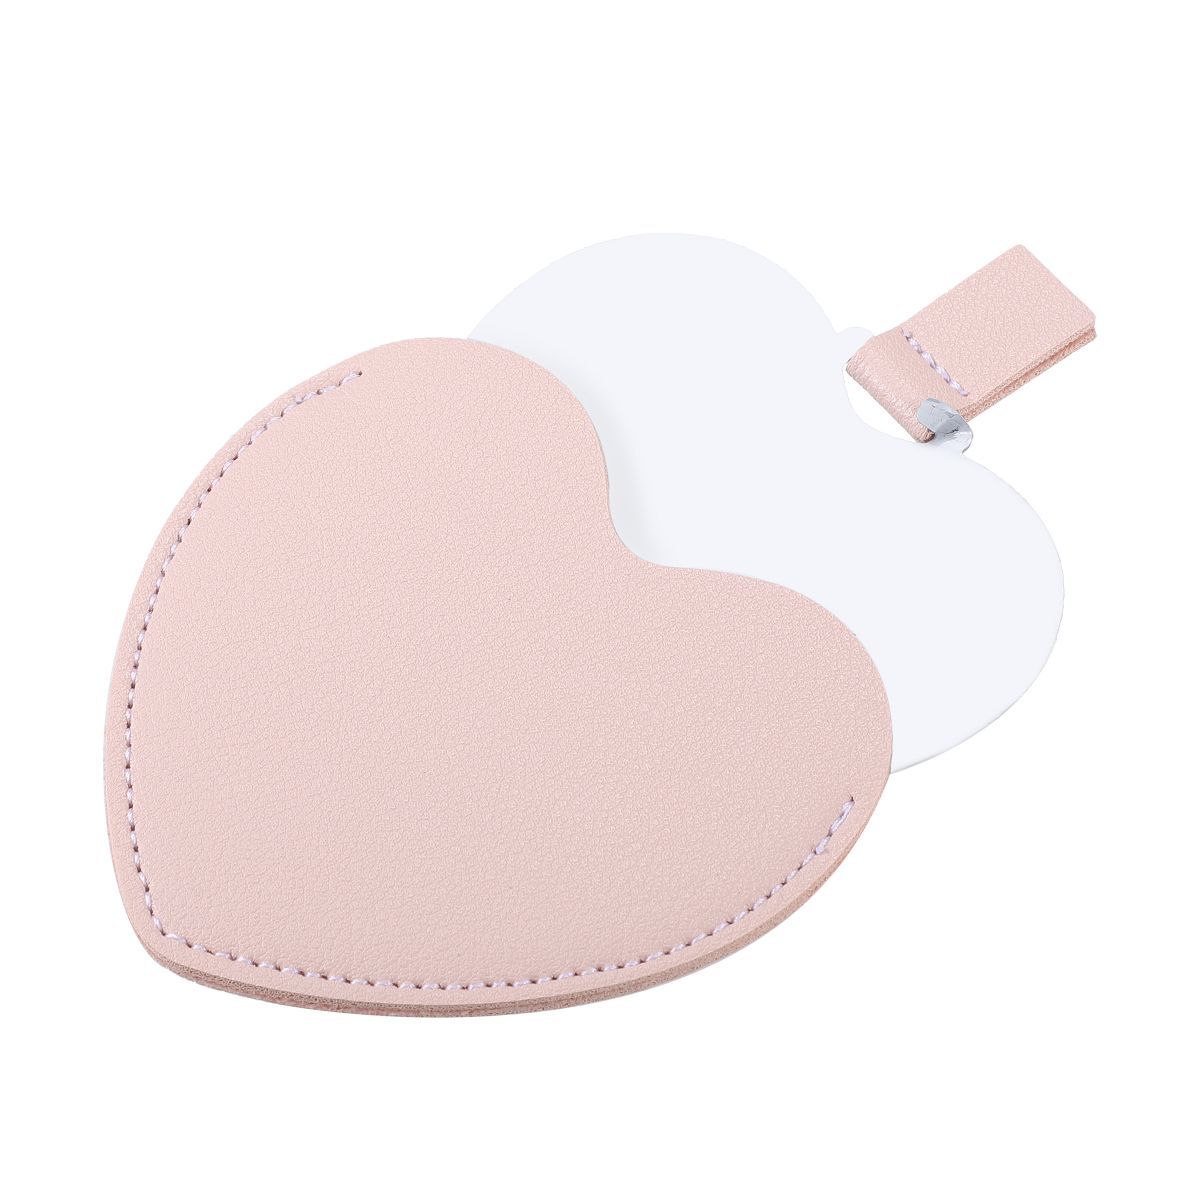 Unique Bargains Stainless Steel Heart Shaped Compact Makeup Mirror and PU Leather Case | Target